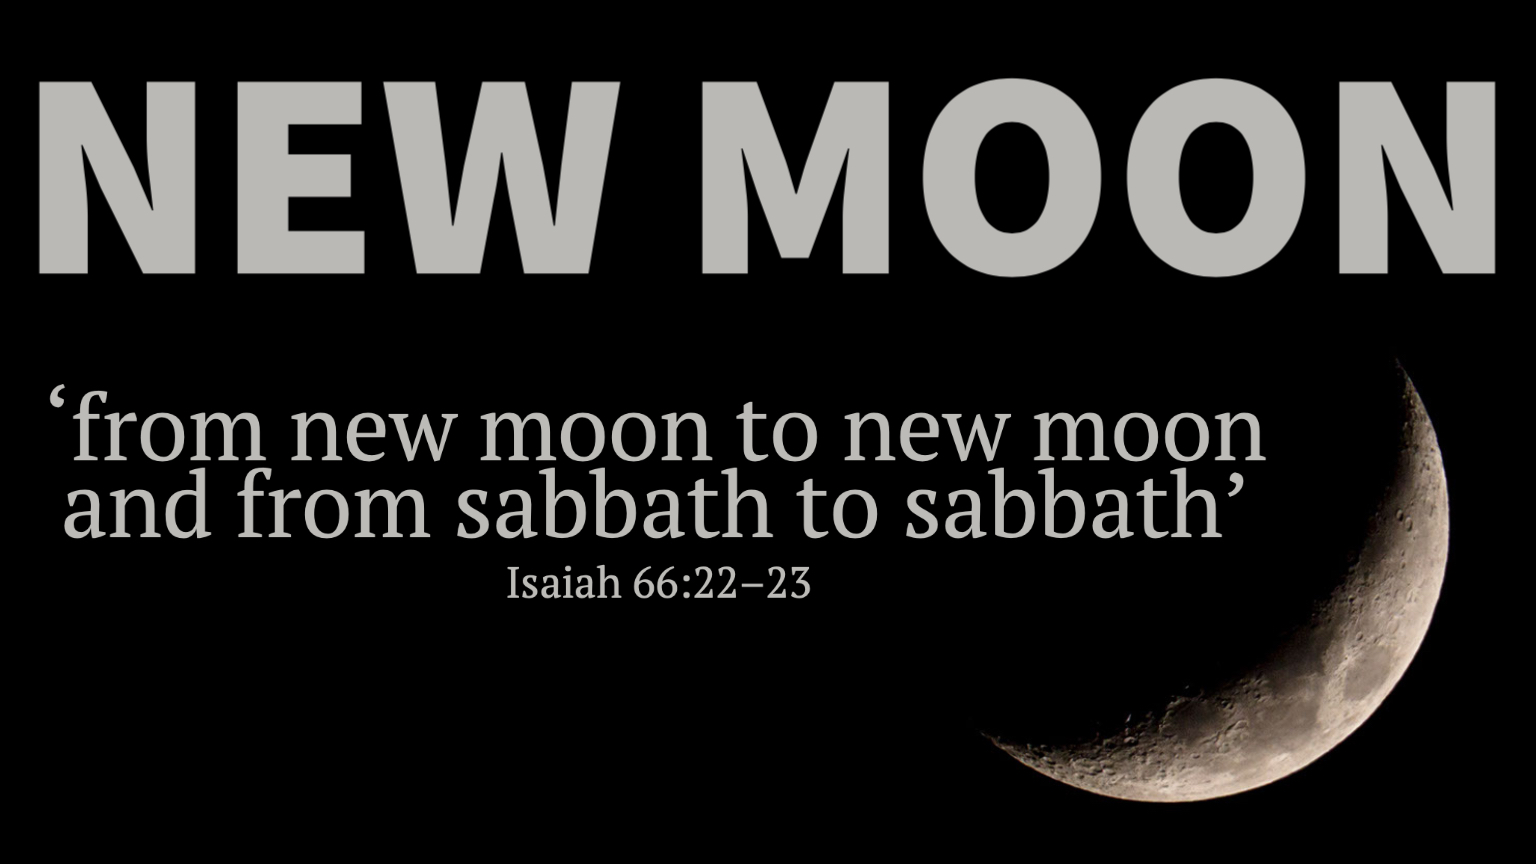 Rosh Chodesh (New Moon): 2nd month online services